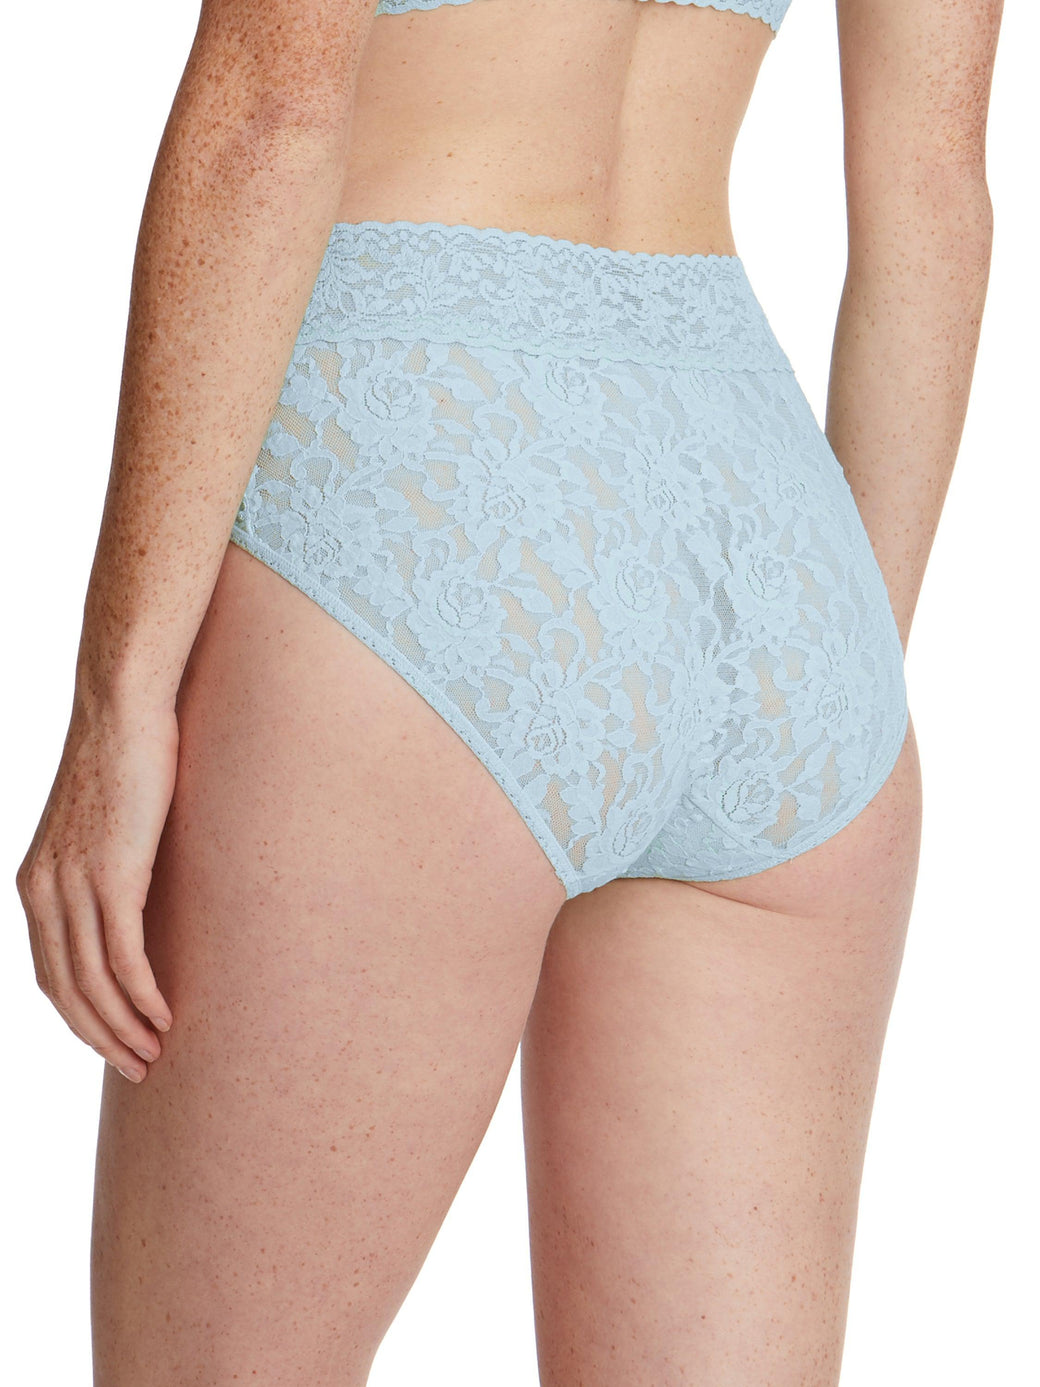 Signature Lace French Brief Partly Cloudy Blue Sale